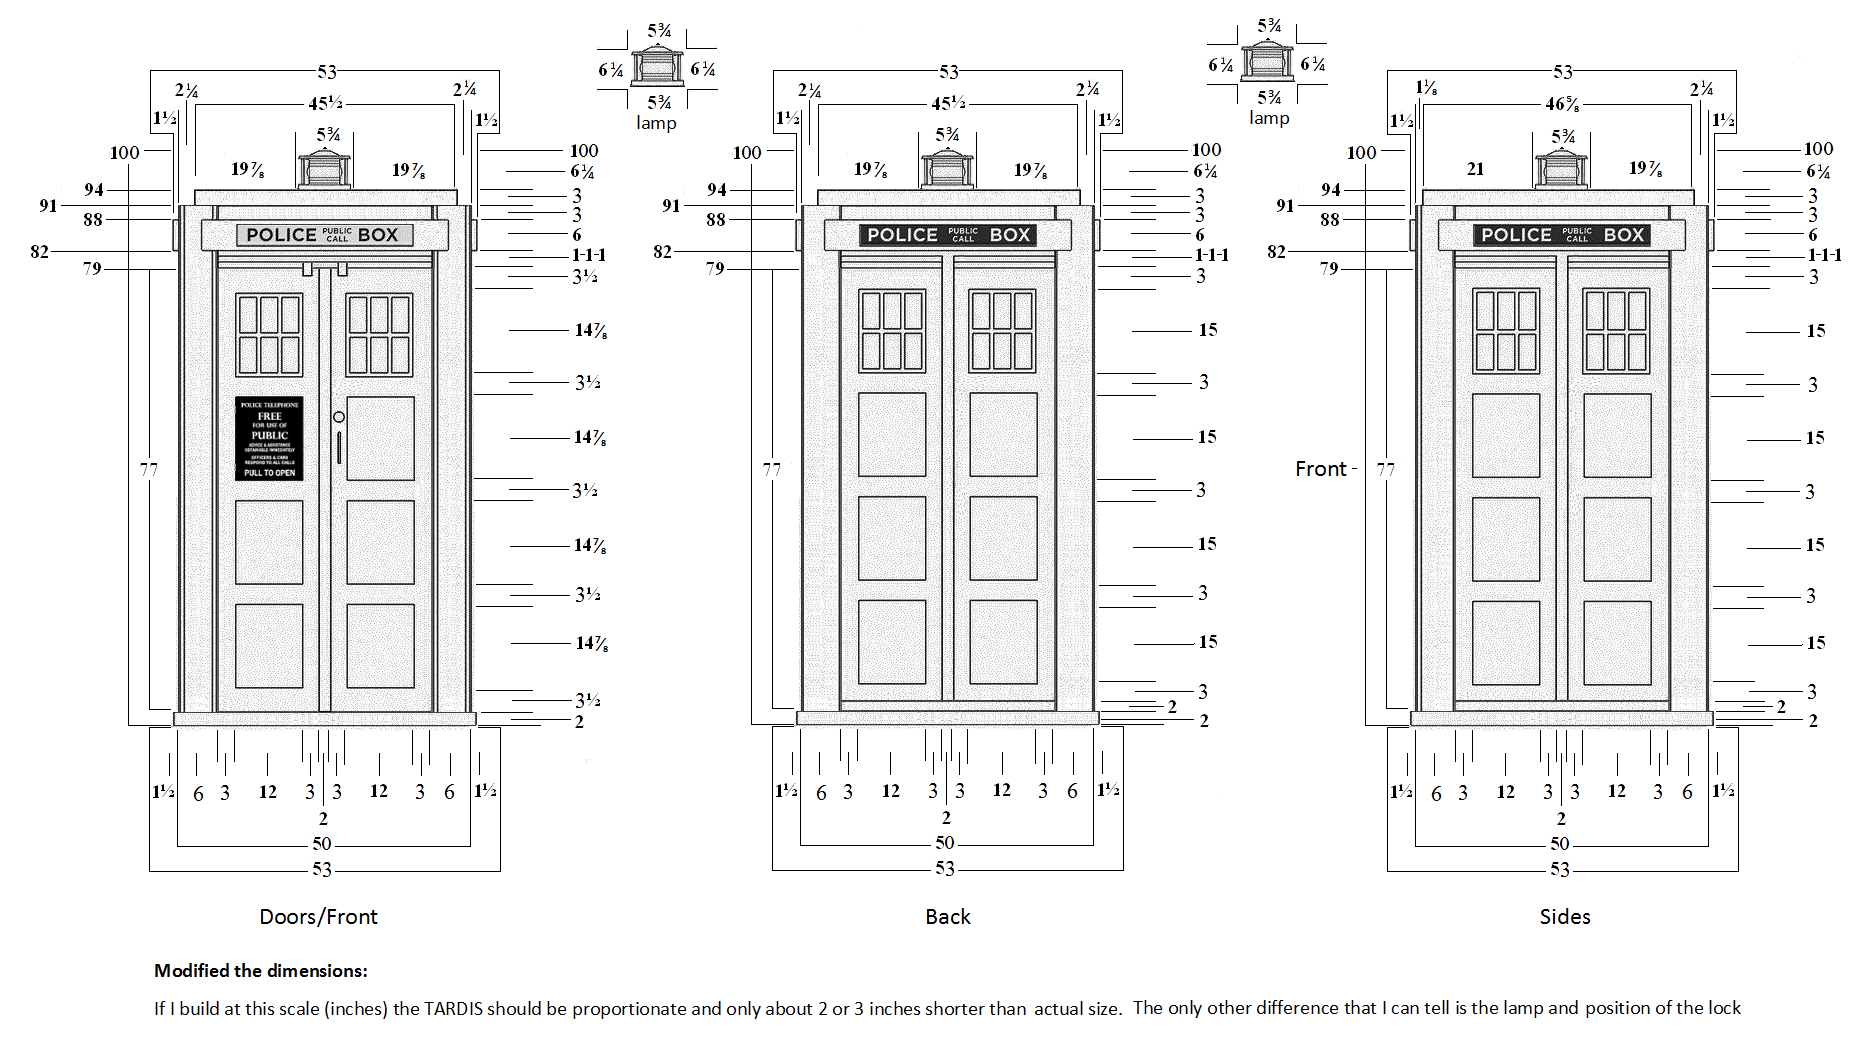 3rd Doctor Tardis Dimensions revised.png